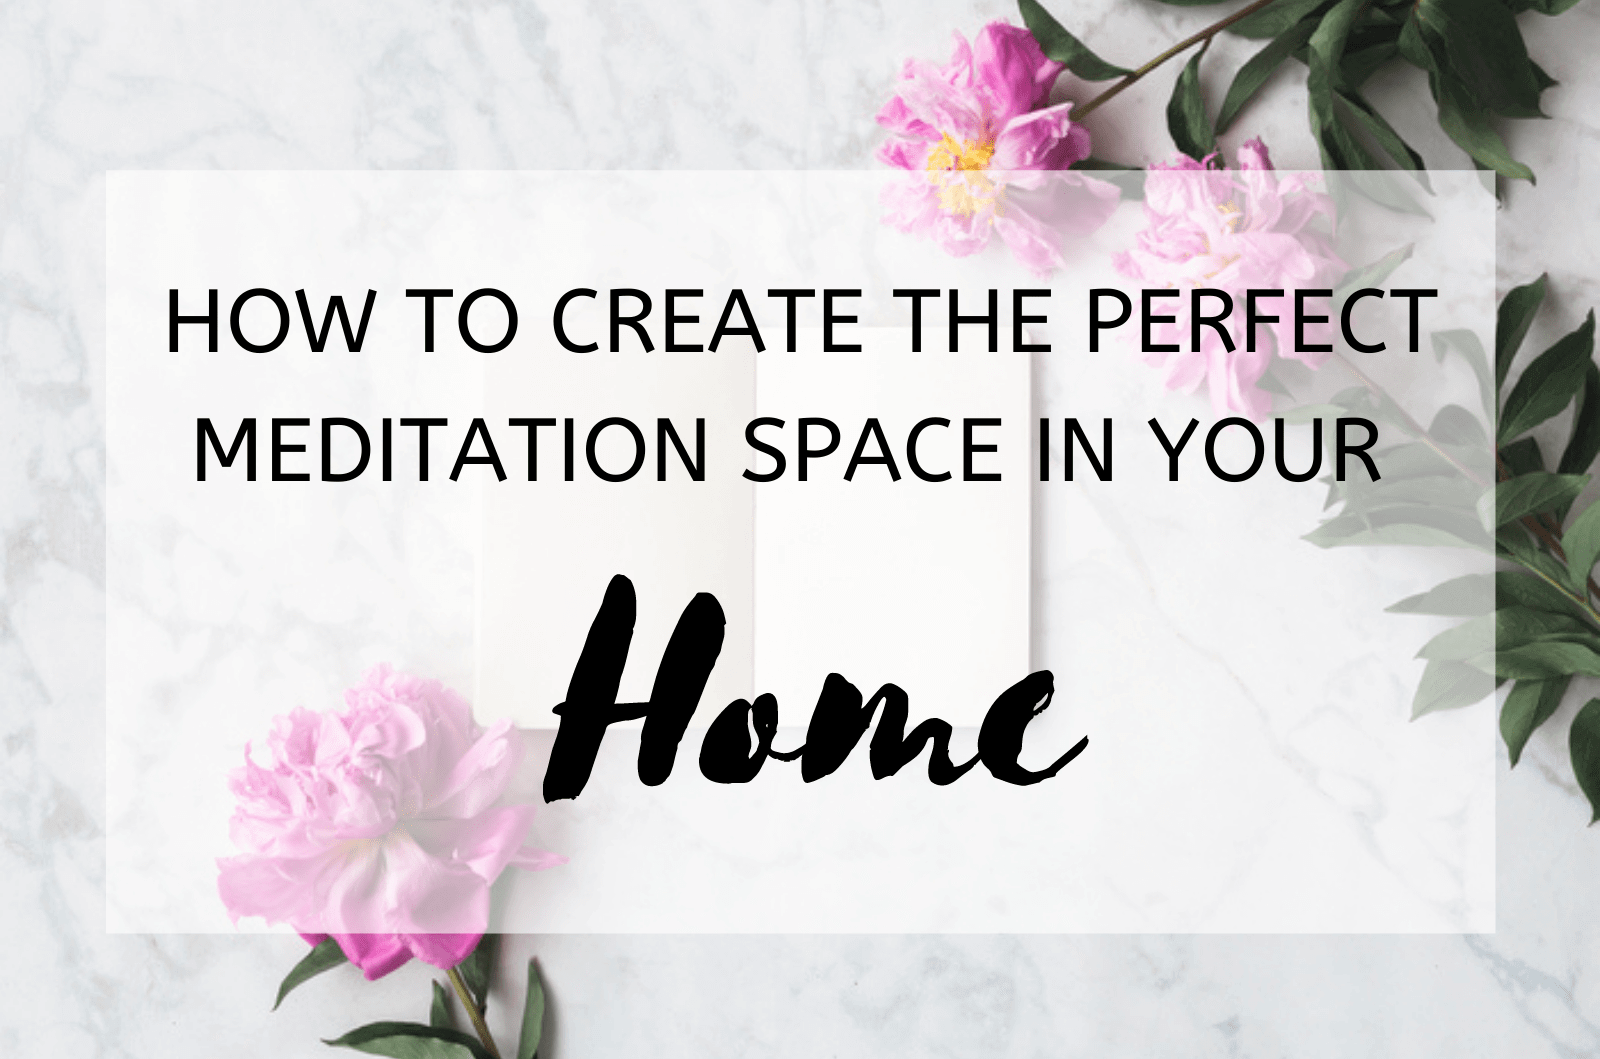 How To Create The Perfect Meditation Space In Your Home